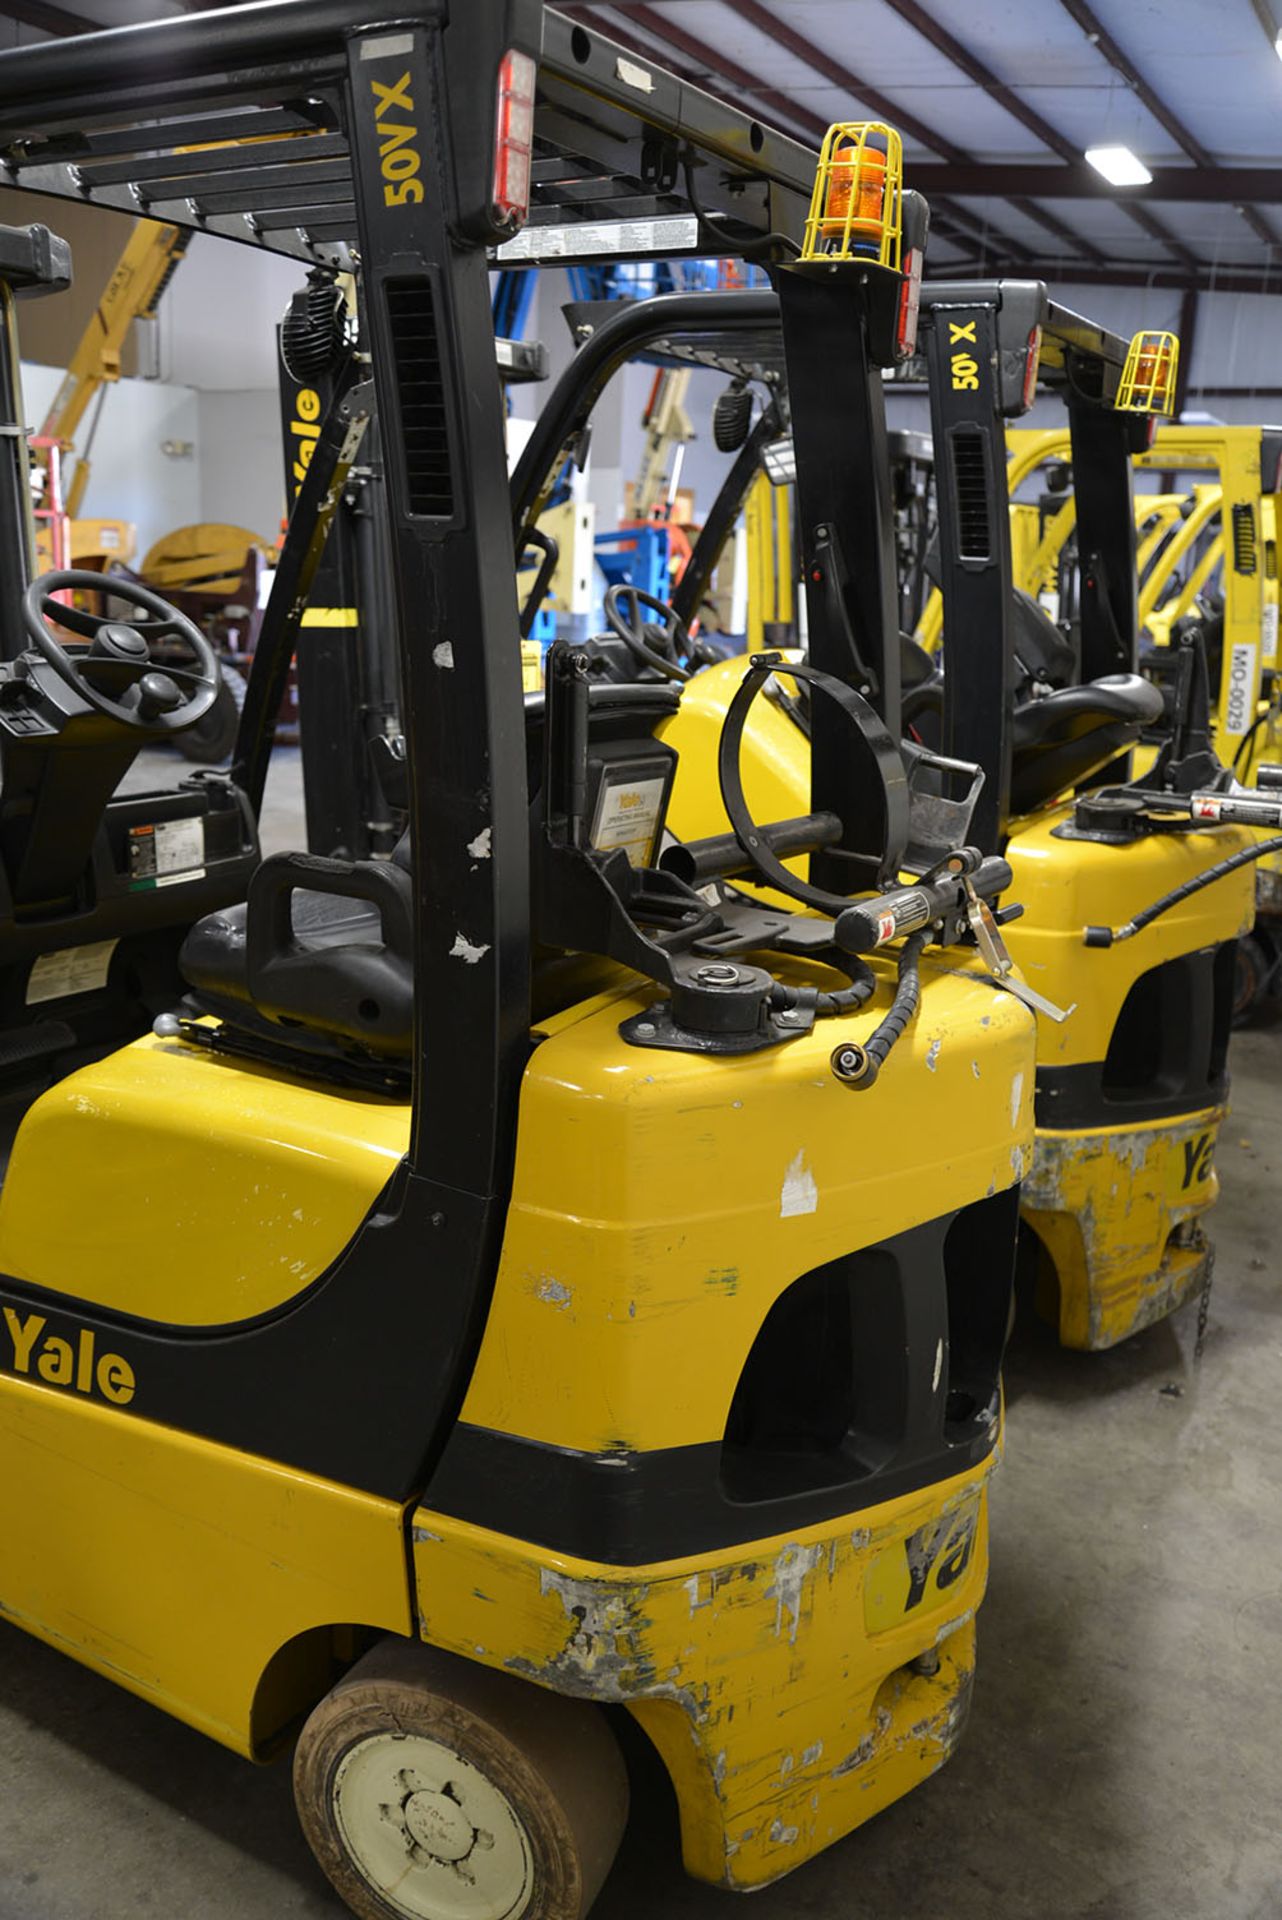 2008 YALE 5,000-lb. Capacity Forklift, Model GLC050VXNV, S/N A910V13920F, LPG, Solid Non-Marking - Image 4 of 5